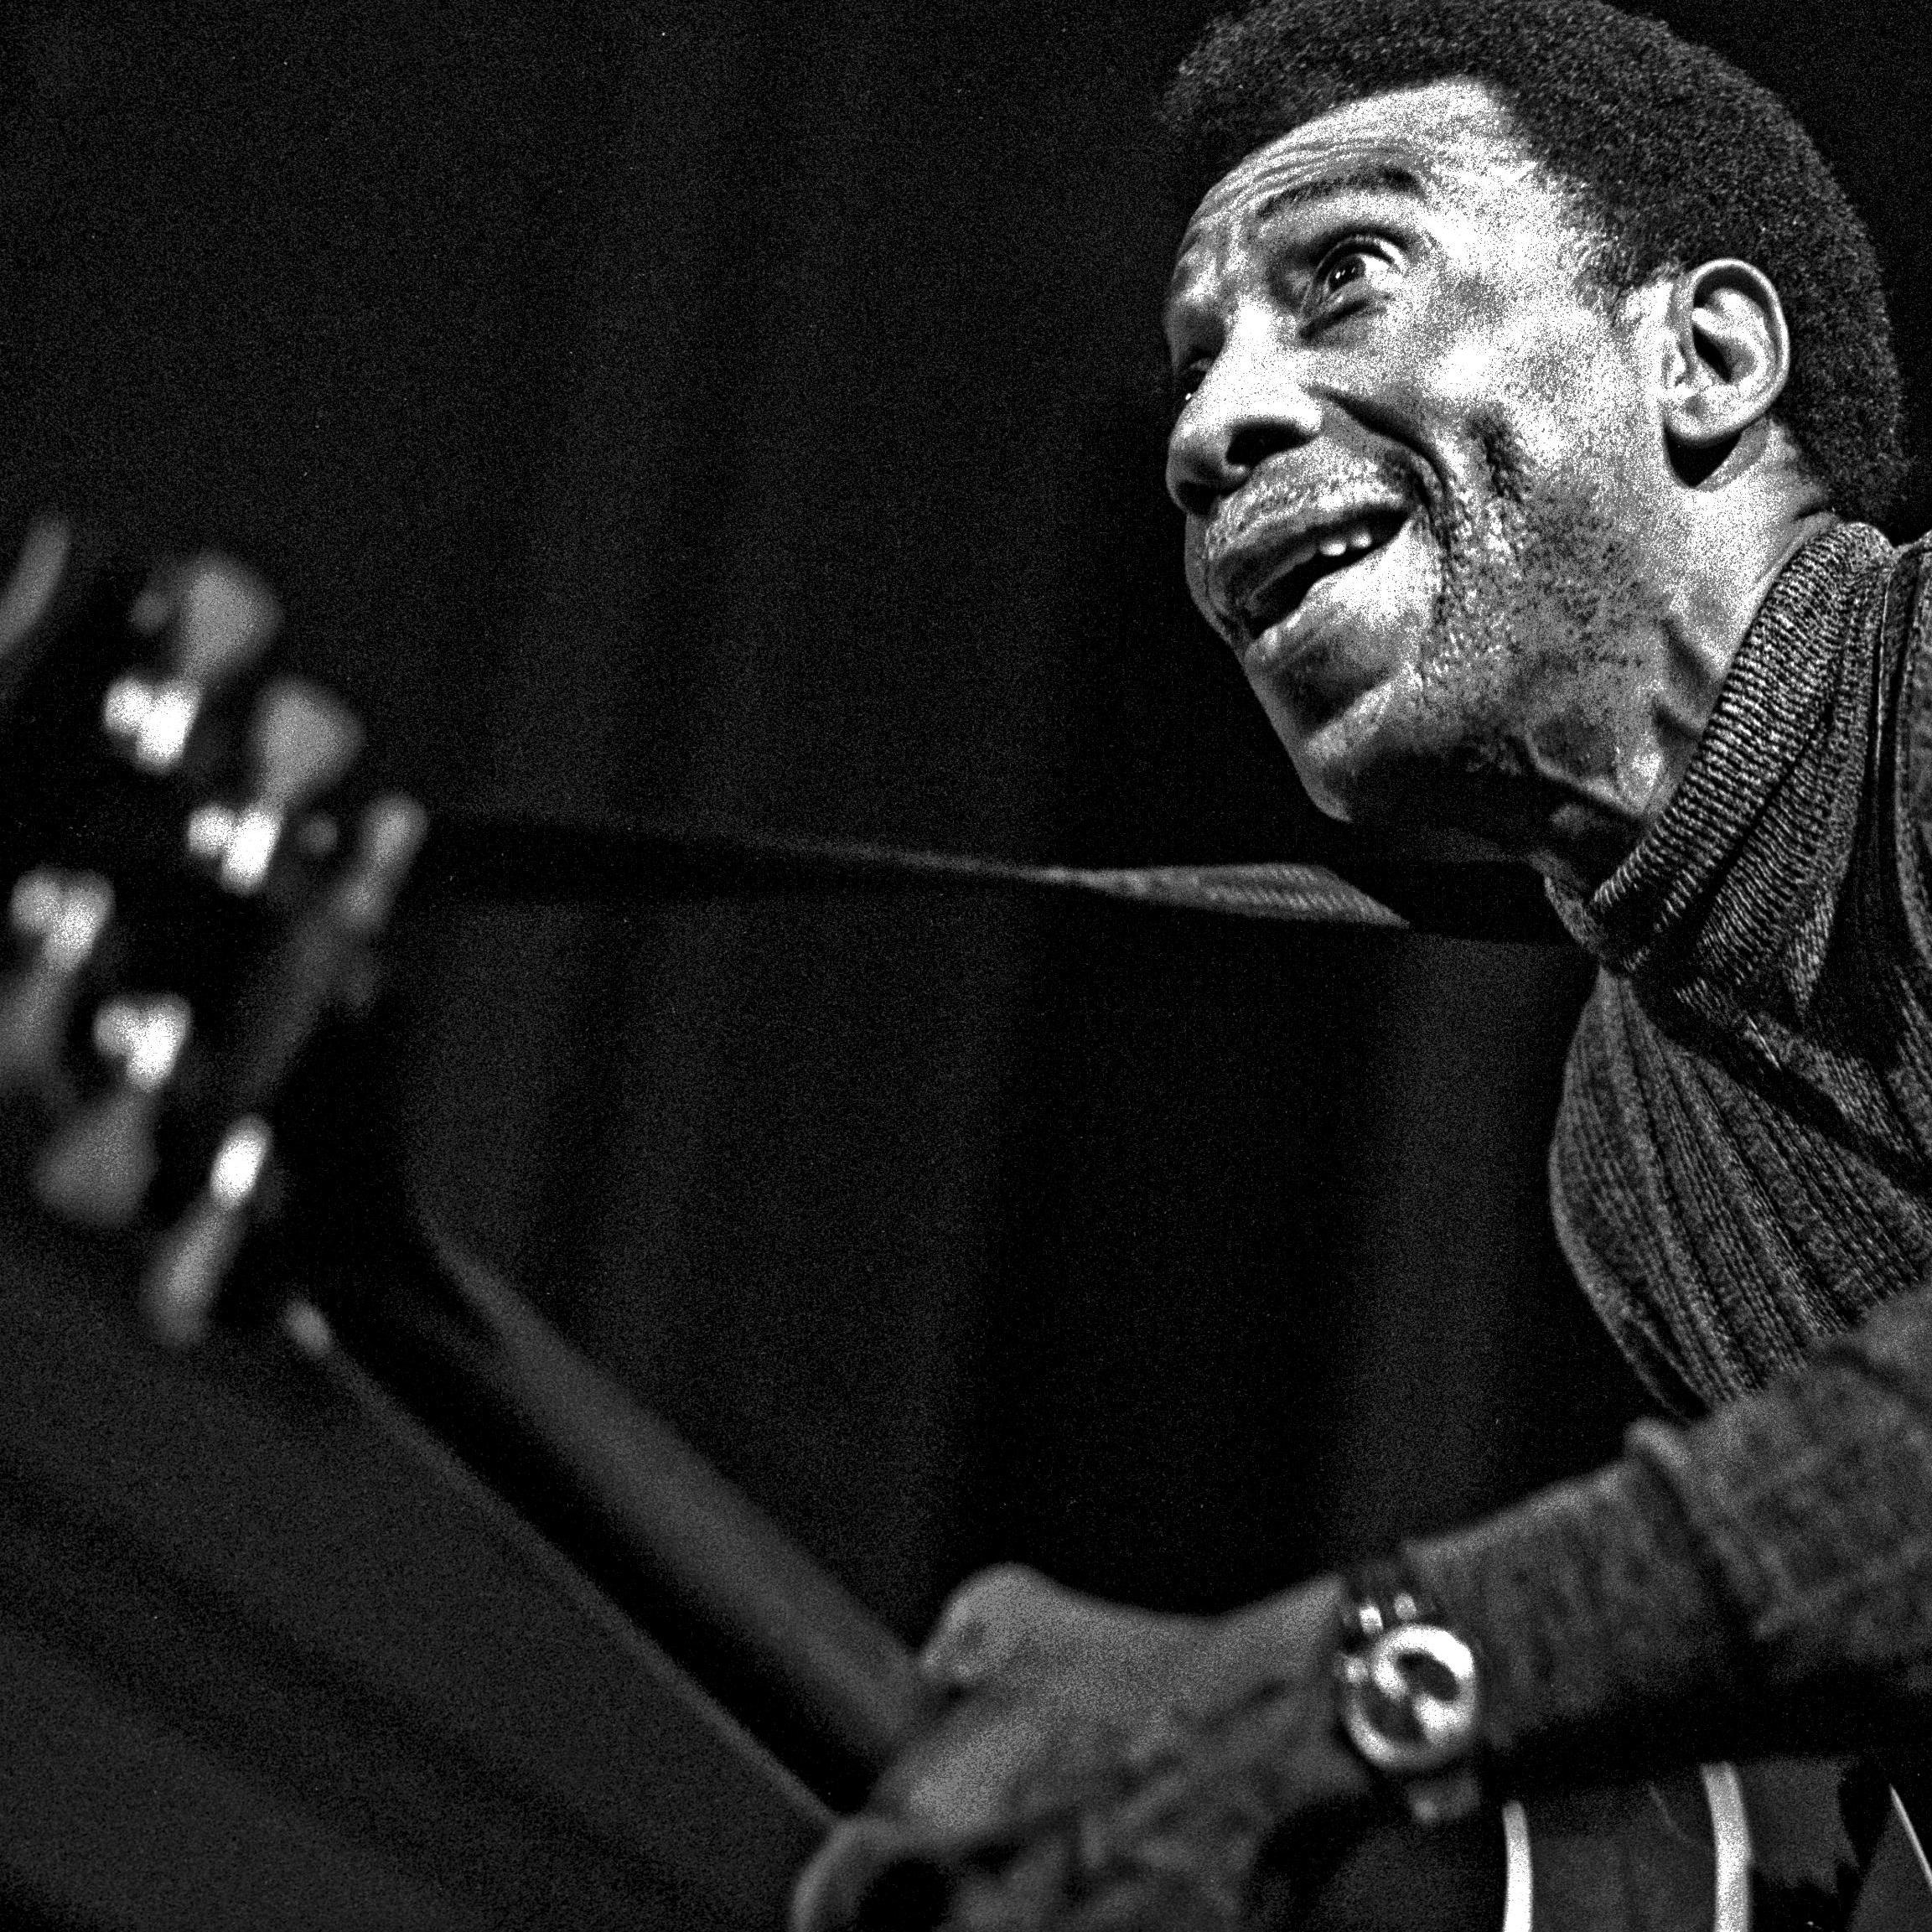 T-Bone Walker, pictured playing guitar in 1972